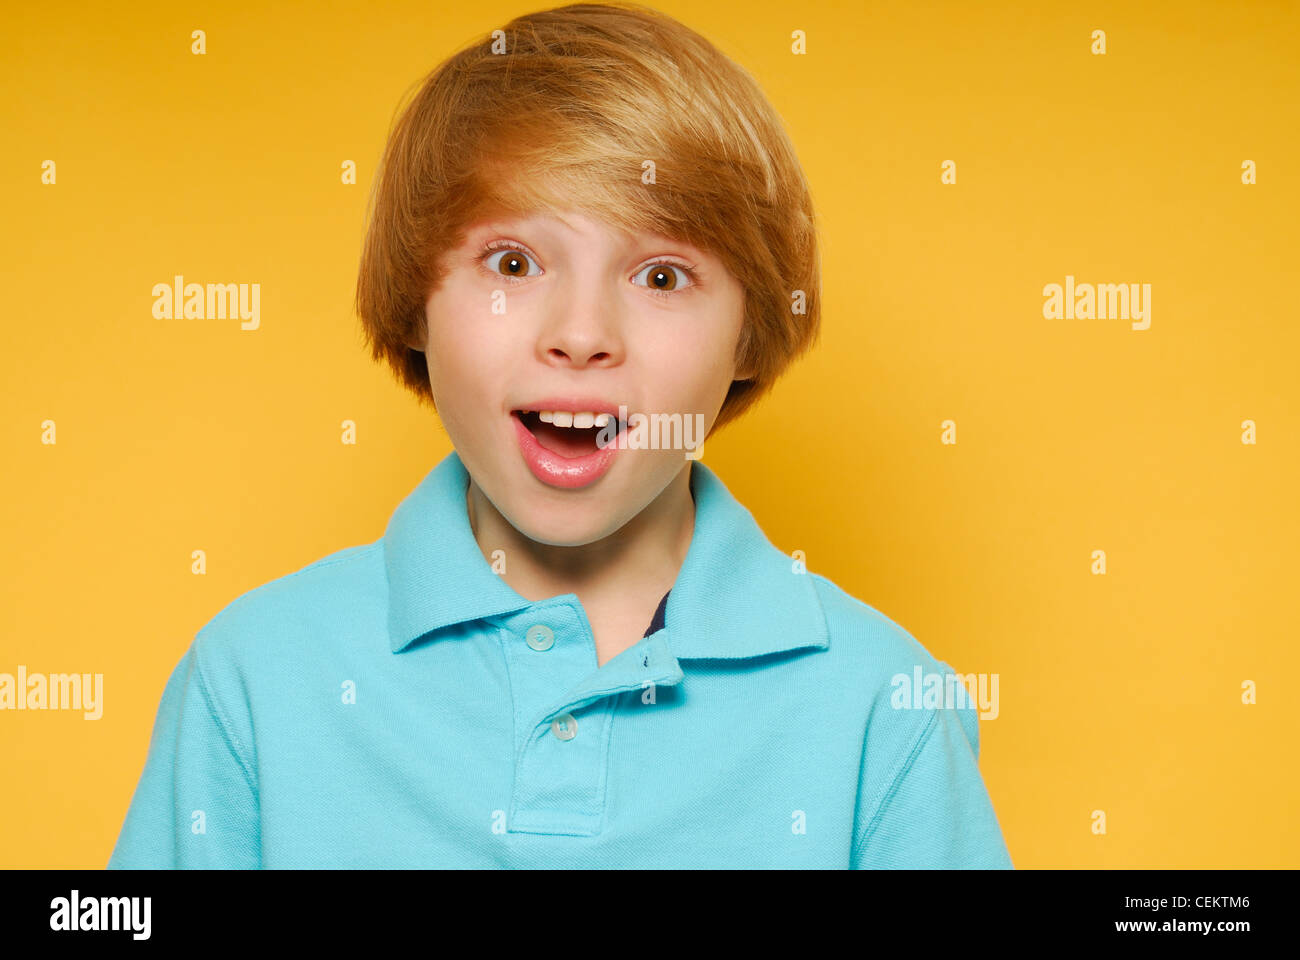 Eleven year old boy with expressive face, looking excited, surprised or amazed. Stock Photo